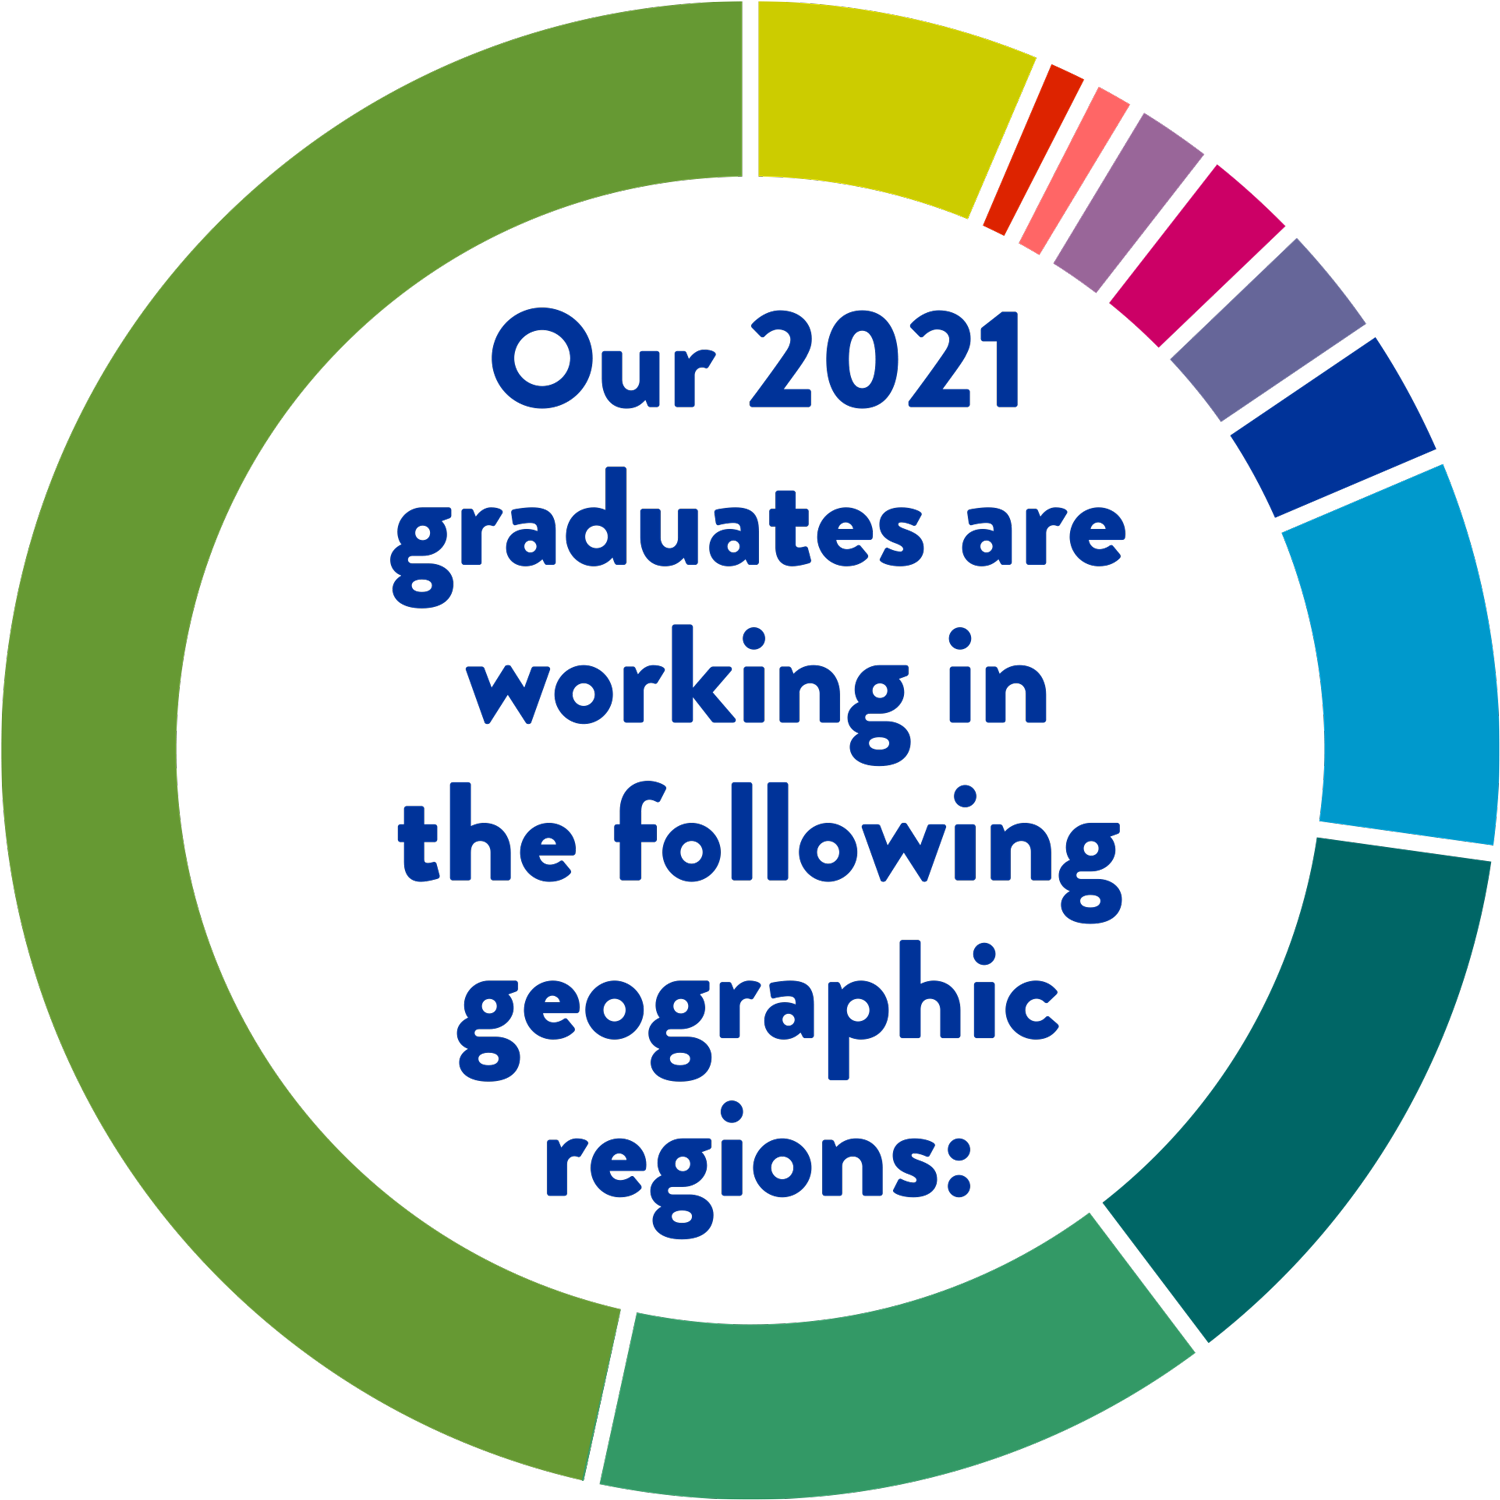 Our 2021 graduates are working in the following geographic regions: